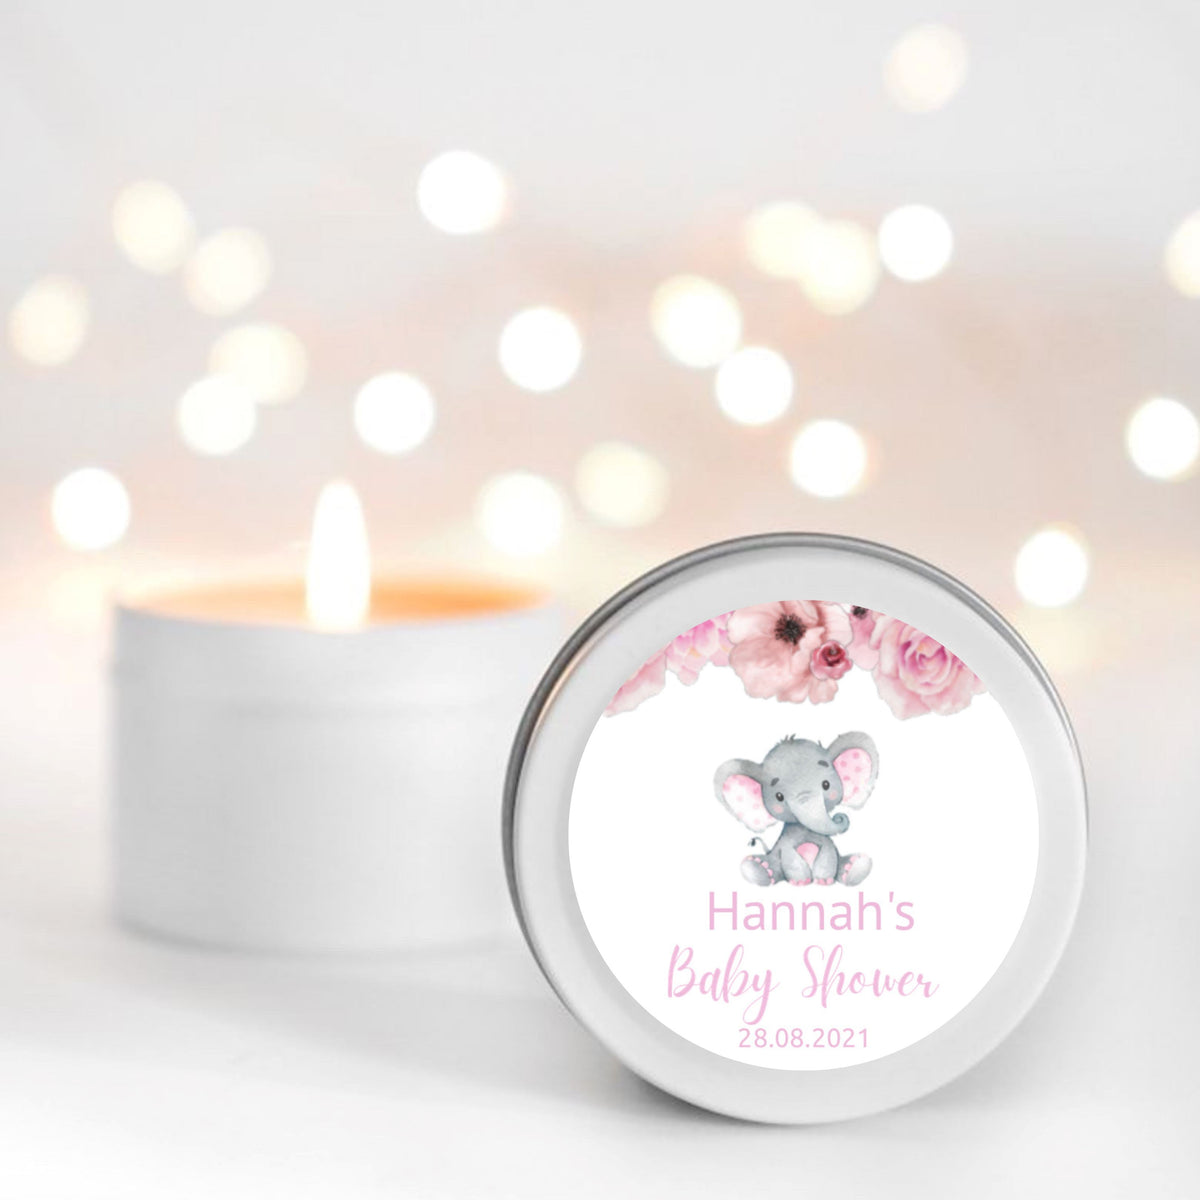 Baby Shower Pink Elephant Candle Favours | Personalisation | 10-12 hours burn time | Soy Wax Candle RISE The Candle Studio 